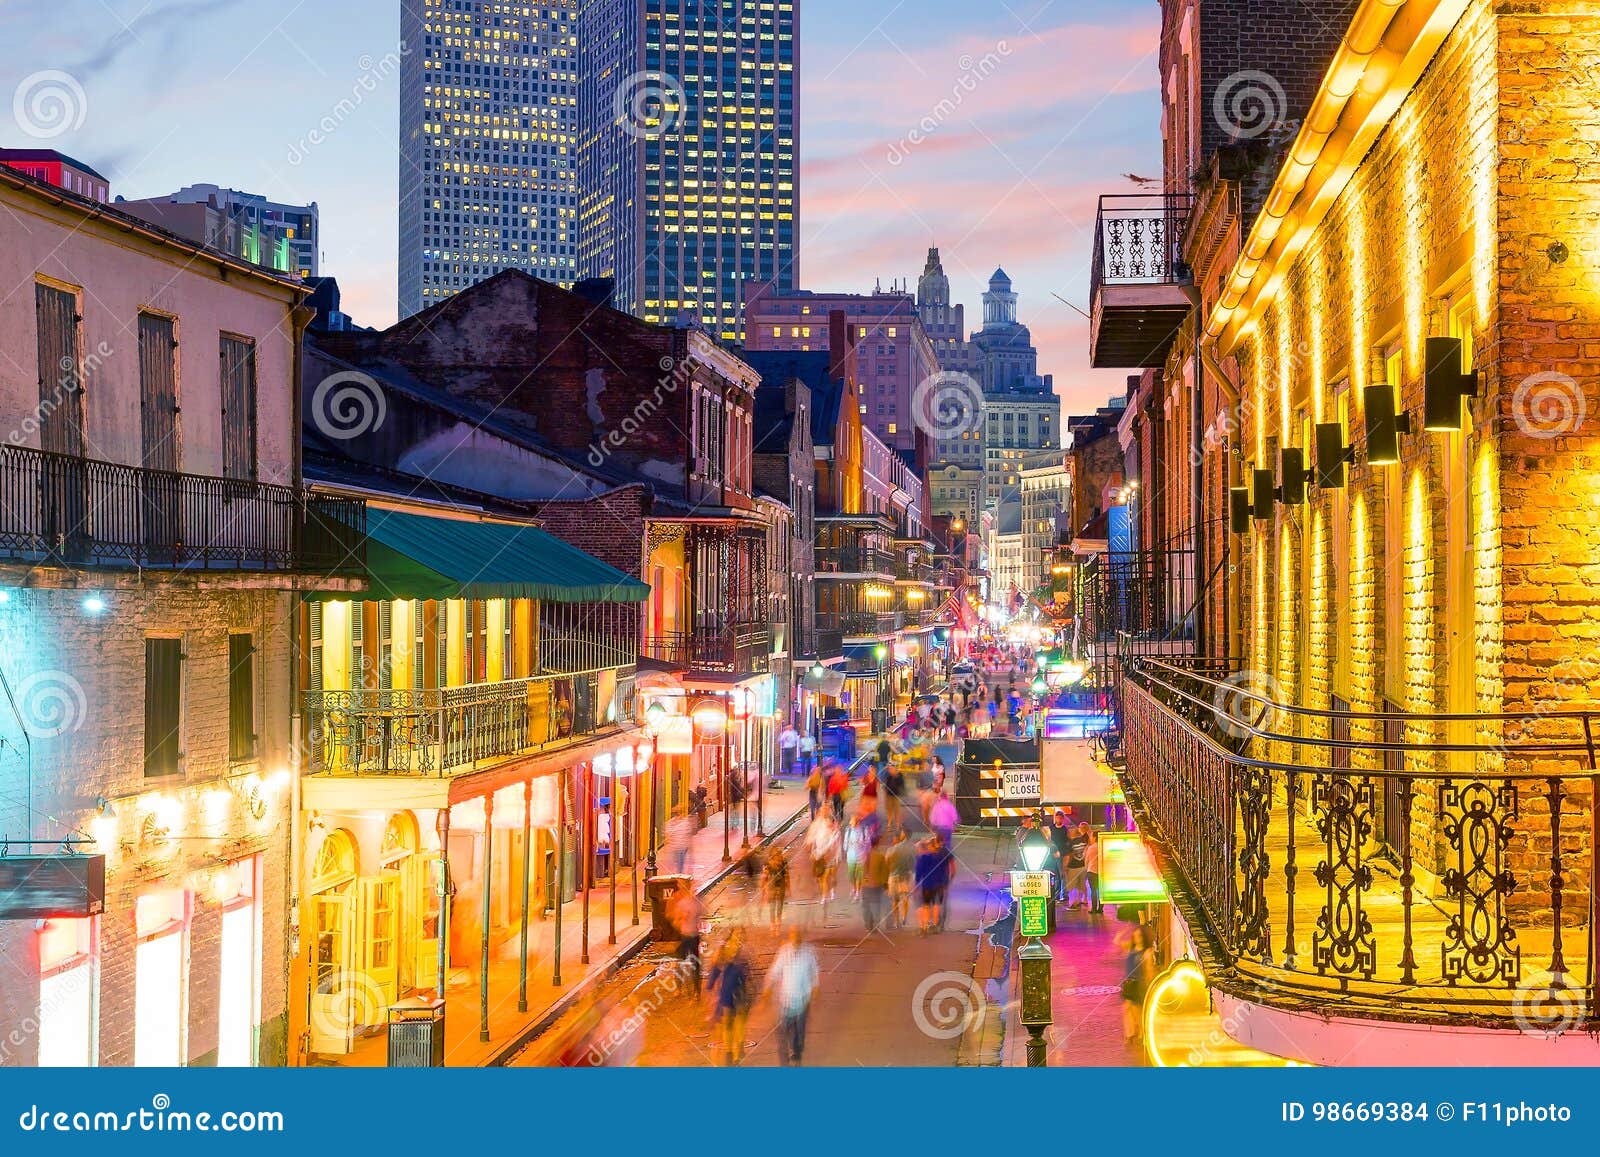 pubs and bars with neon lights in the french quarter, new orleans